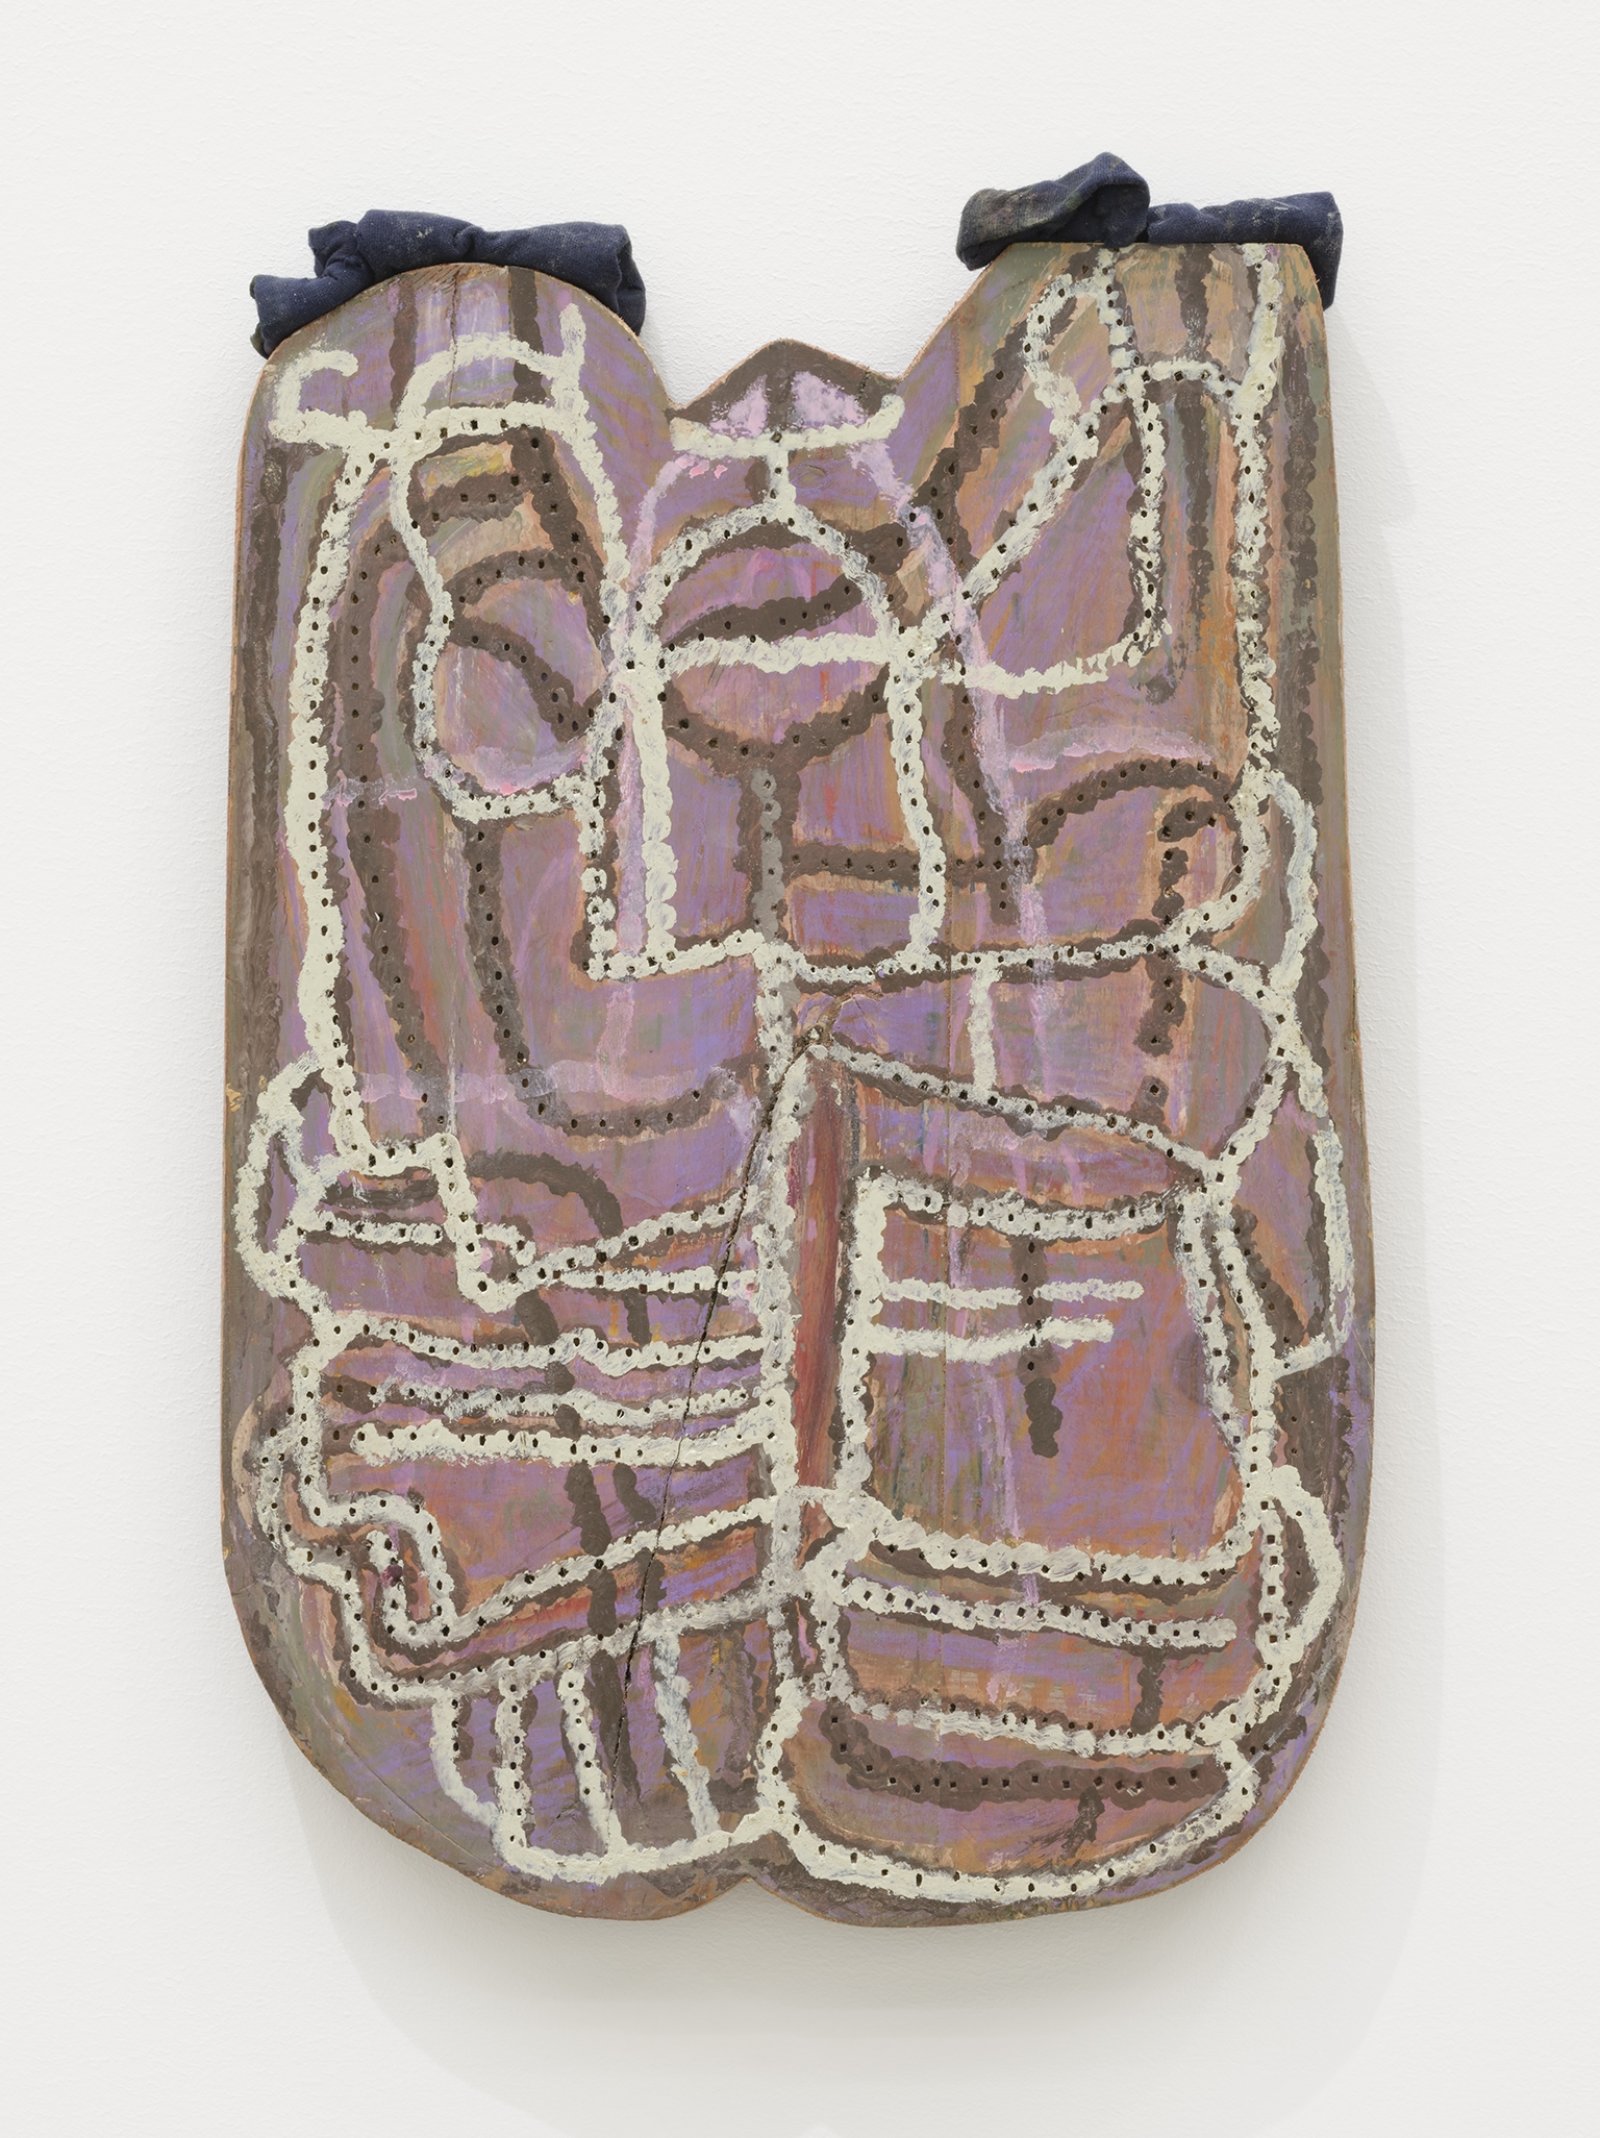 Ashes Withyman, Breath marionette, 2019, found wood, previously frozen paint, coloured pencil, fabric, nails, 17 x 11 in. (42 x 28 cm)